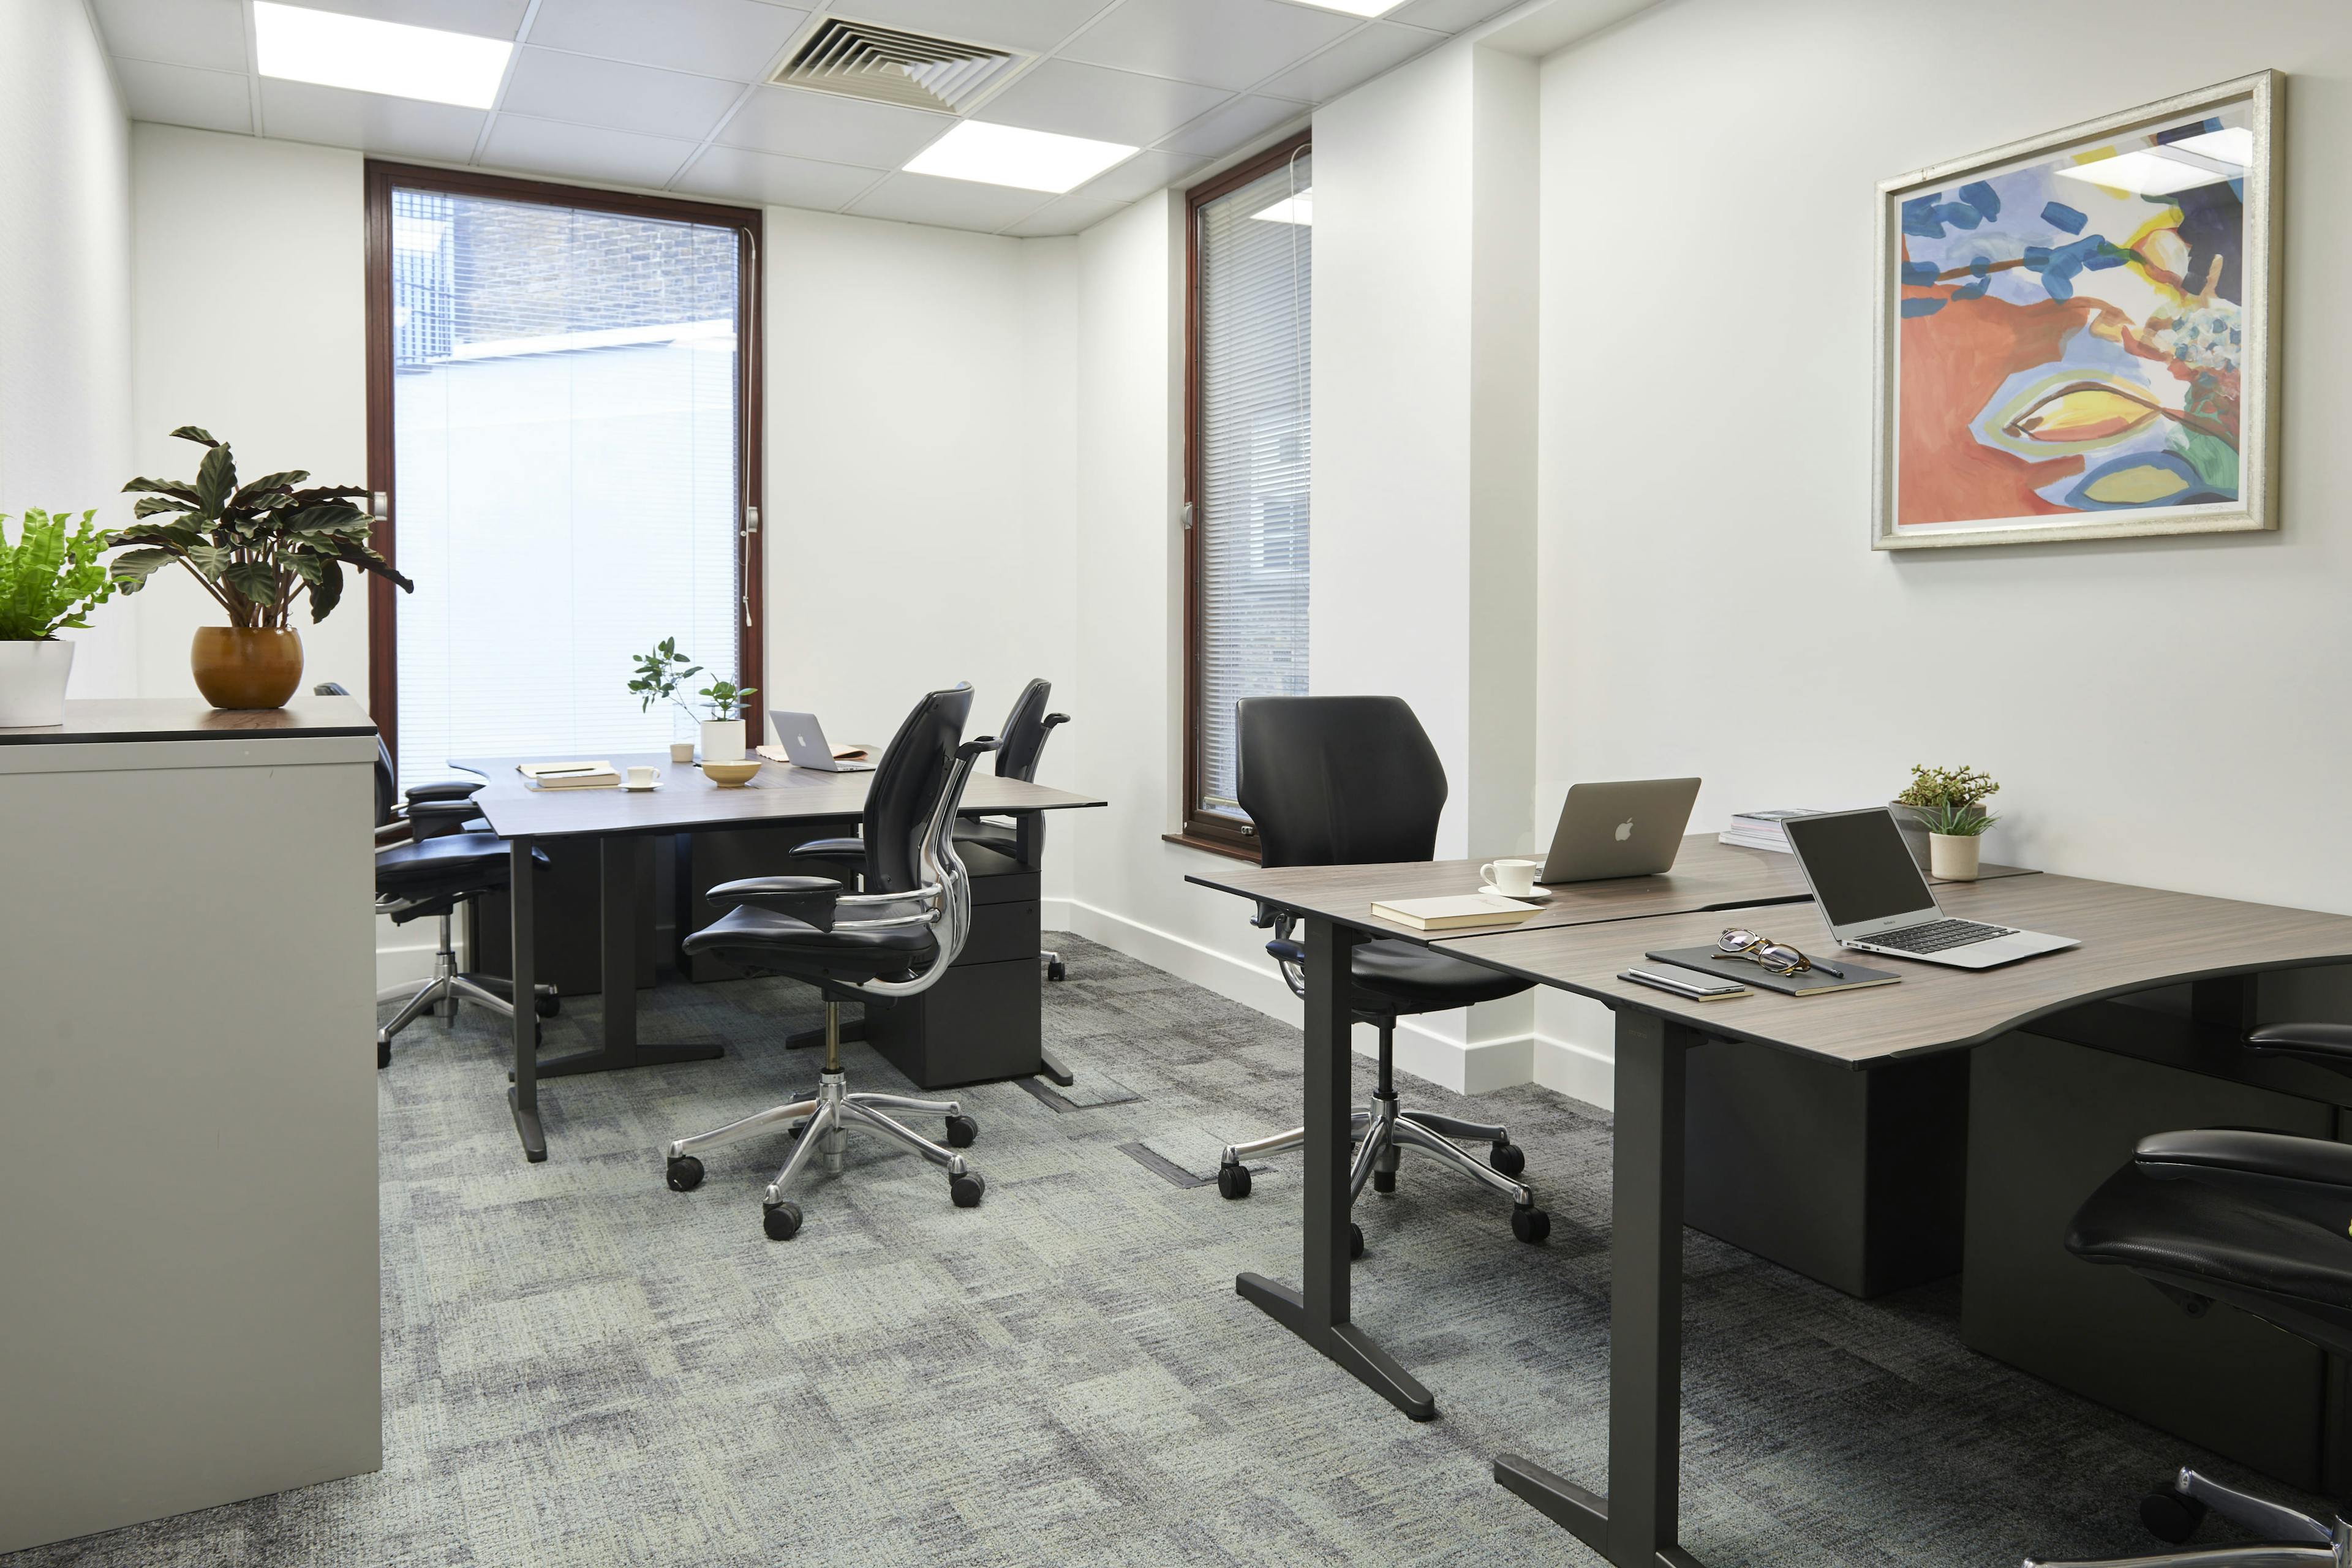 St Pauls – 7 Person Office – Snow Hill